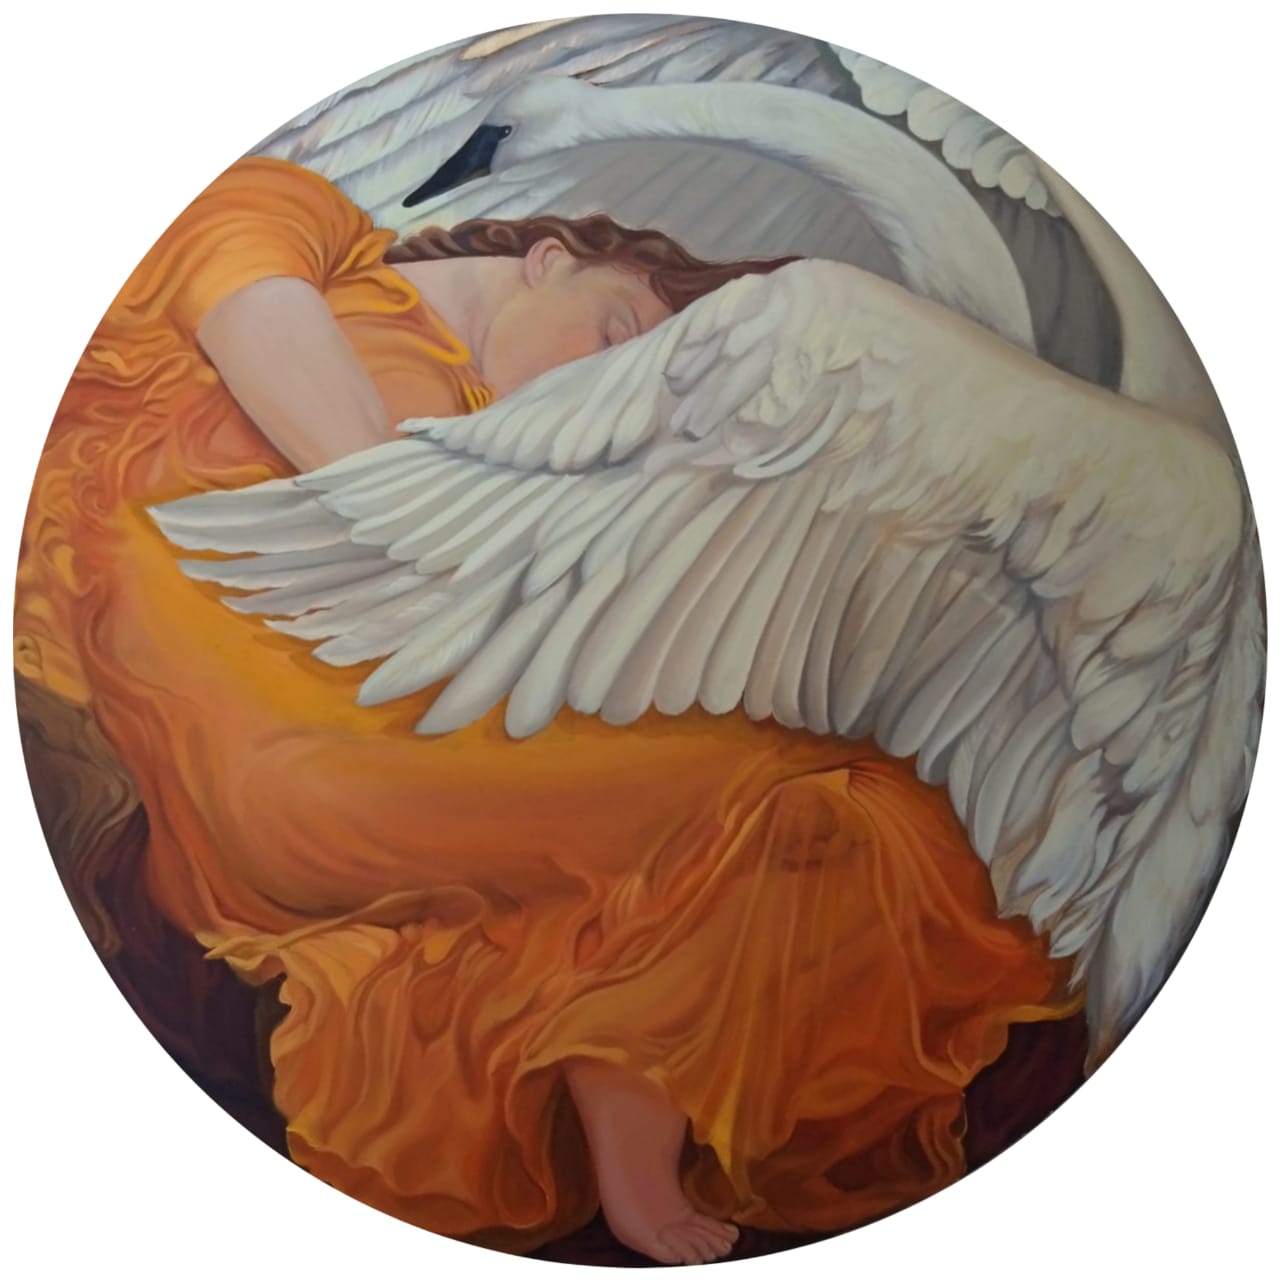 ‘Leda’s Flaming June’<br>Oil Paints & Gold Leaf on Canvas<br>48x48 inches<br>2022